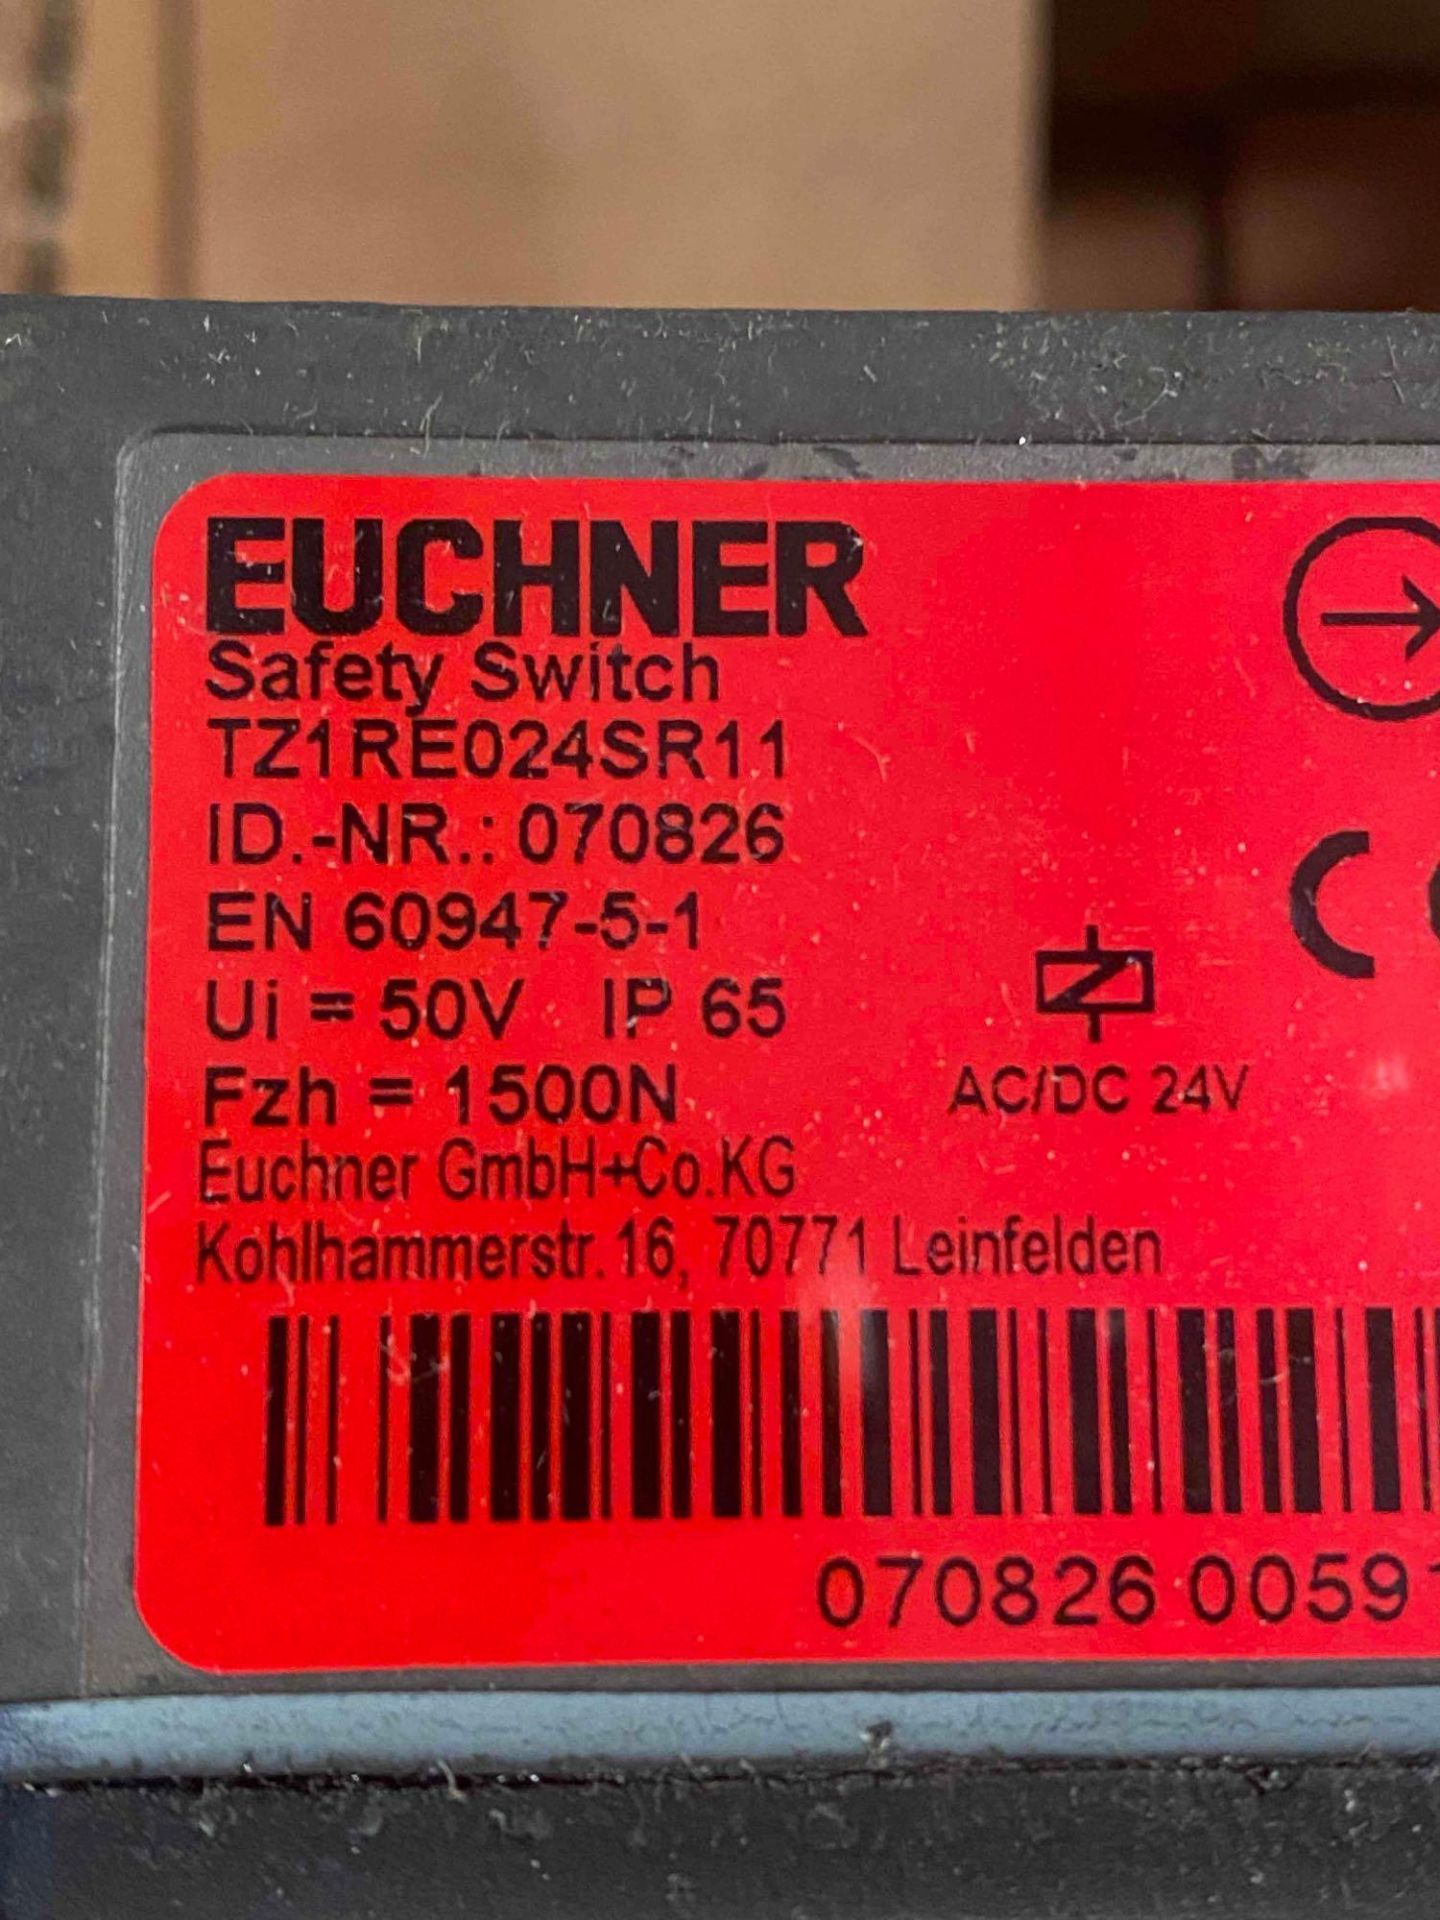 LOT OF (2) ASSORTED EUCHNER SAFETY SWITCHES - Image 4 of 4